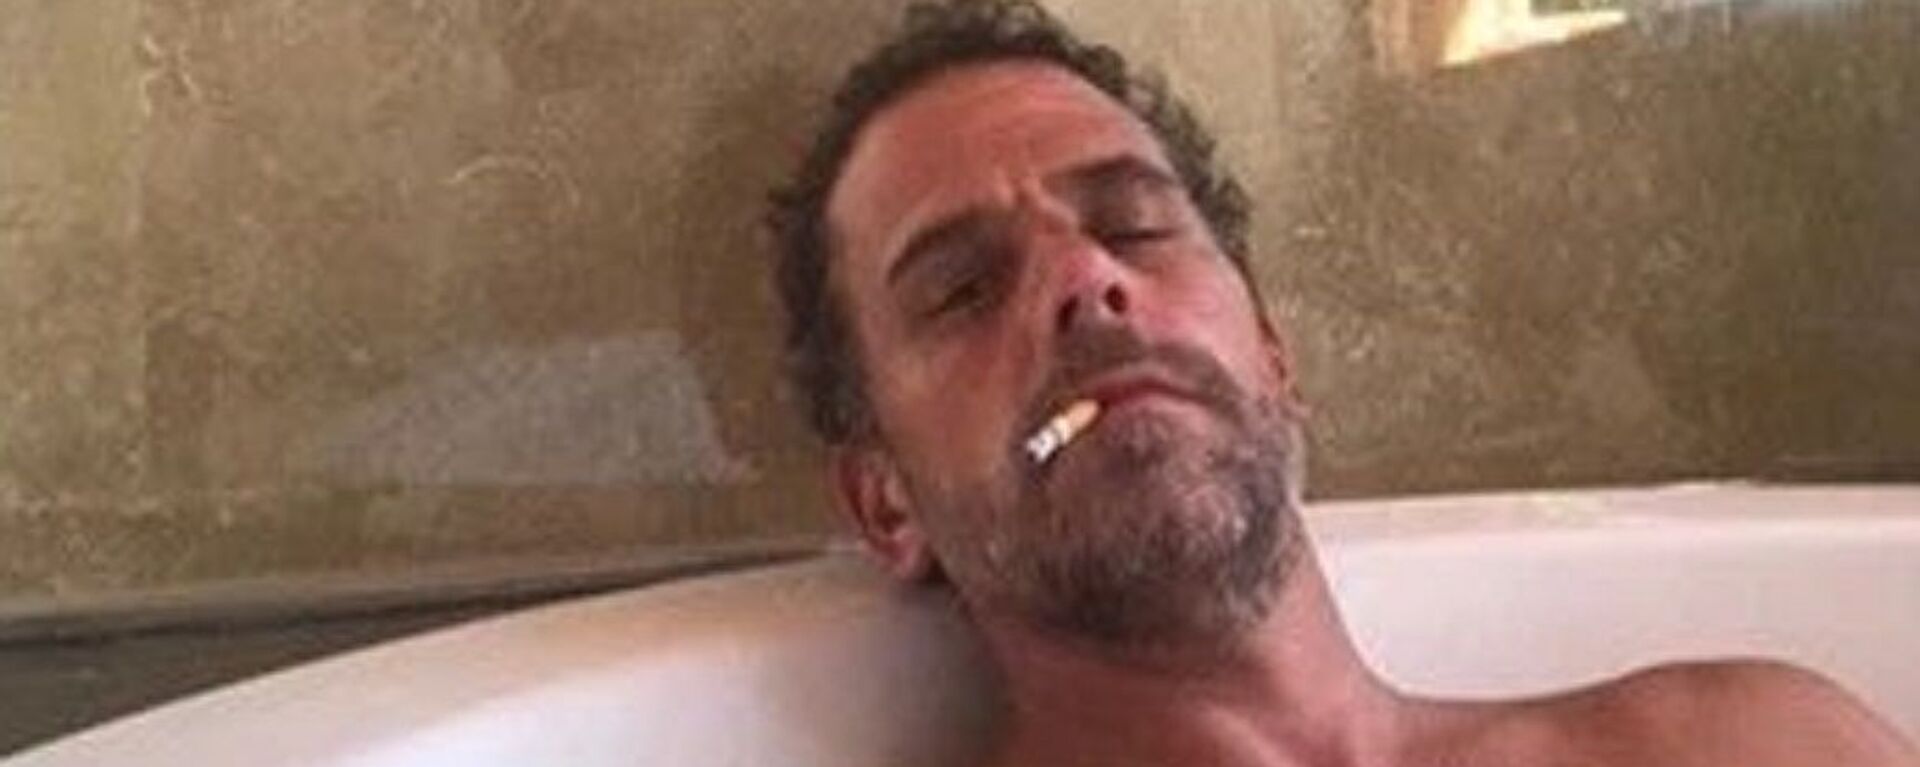 Photo of Hunter Biden relaxing in a bathtub, reportedly taken from a computer dropped off at a Delaware computer repair shop. - Sputnik International, 1920, 08.10.2021